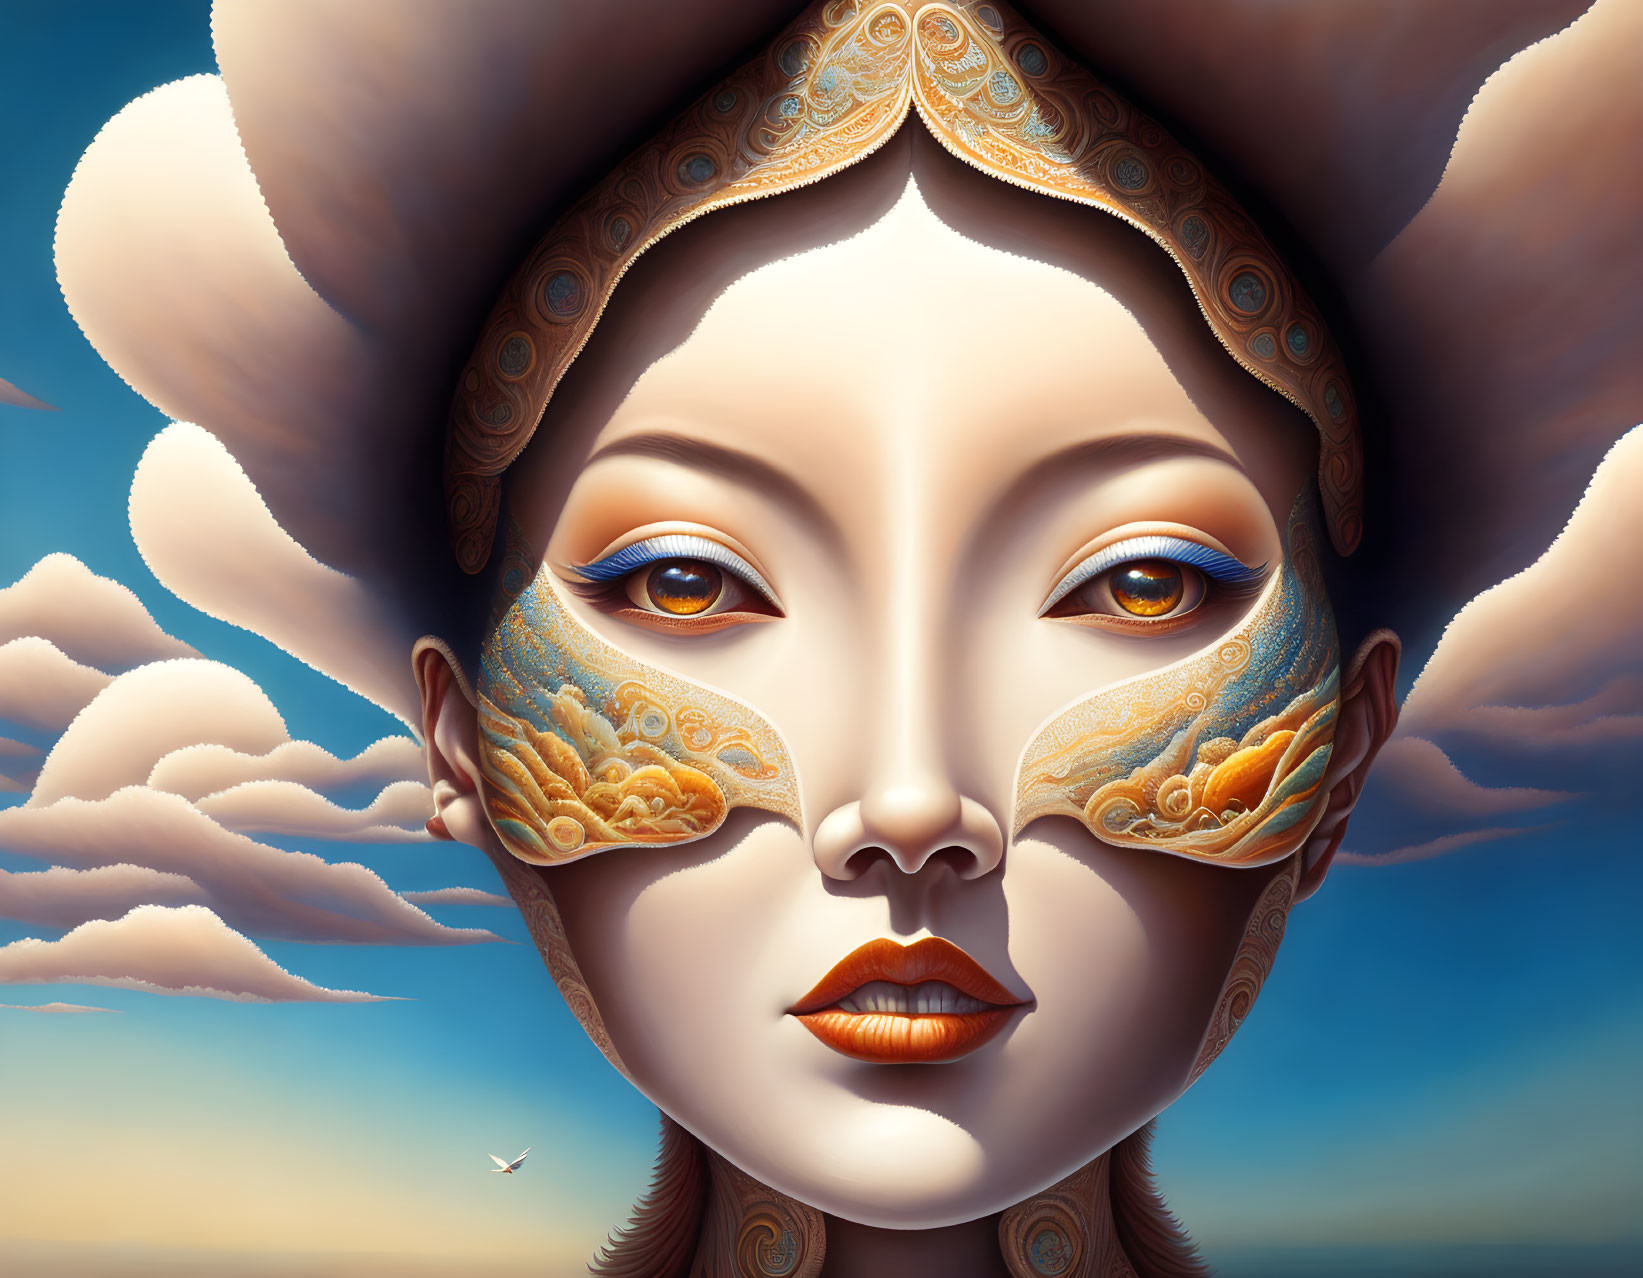 Surreal portrait of woman with elaborate headwear and reflected clouds in eyes, against sky backdrop with